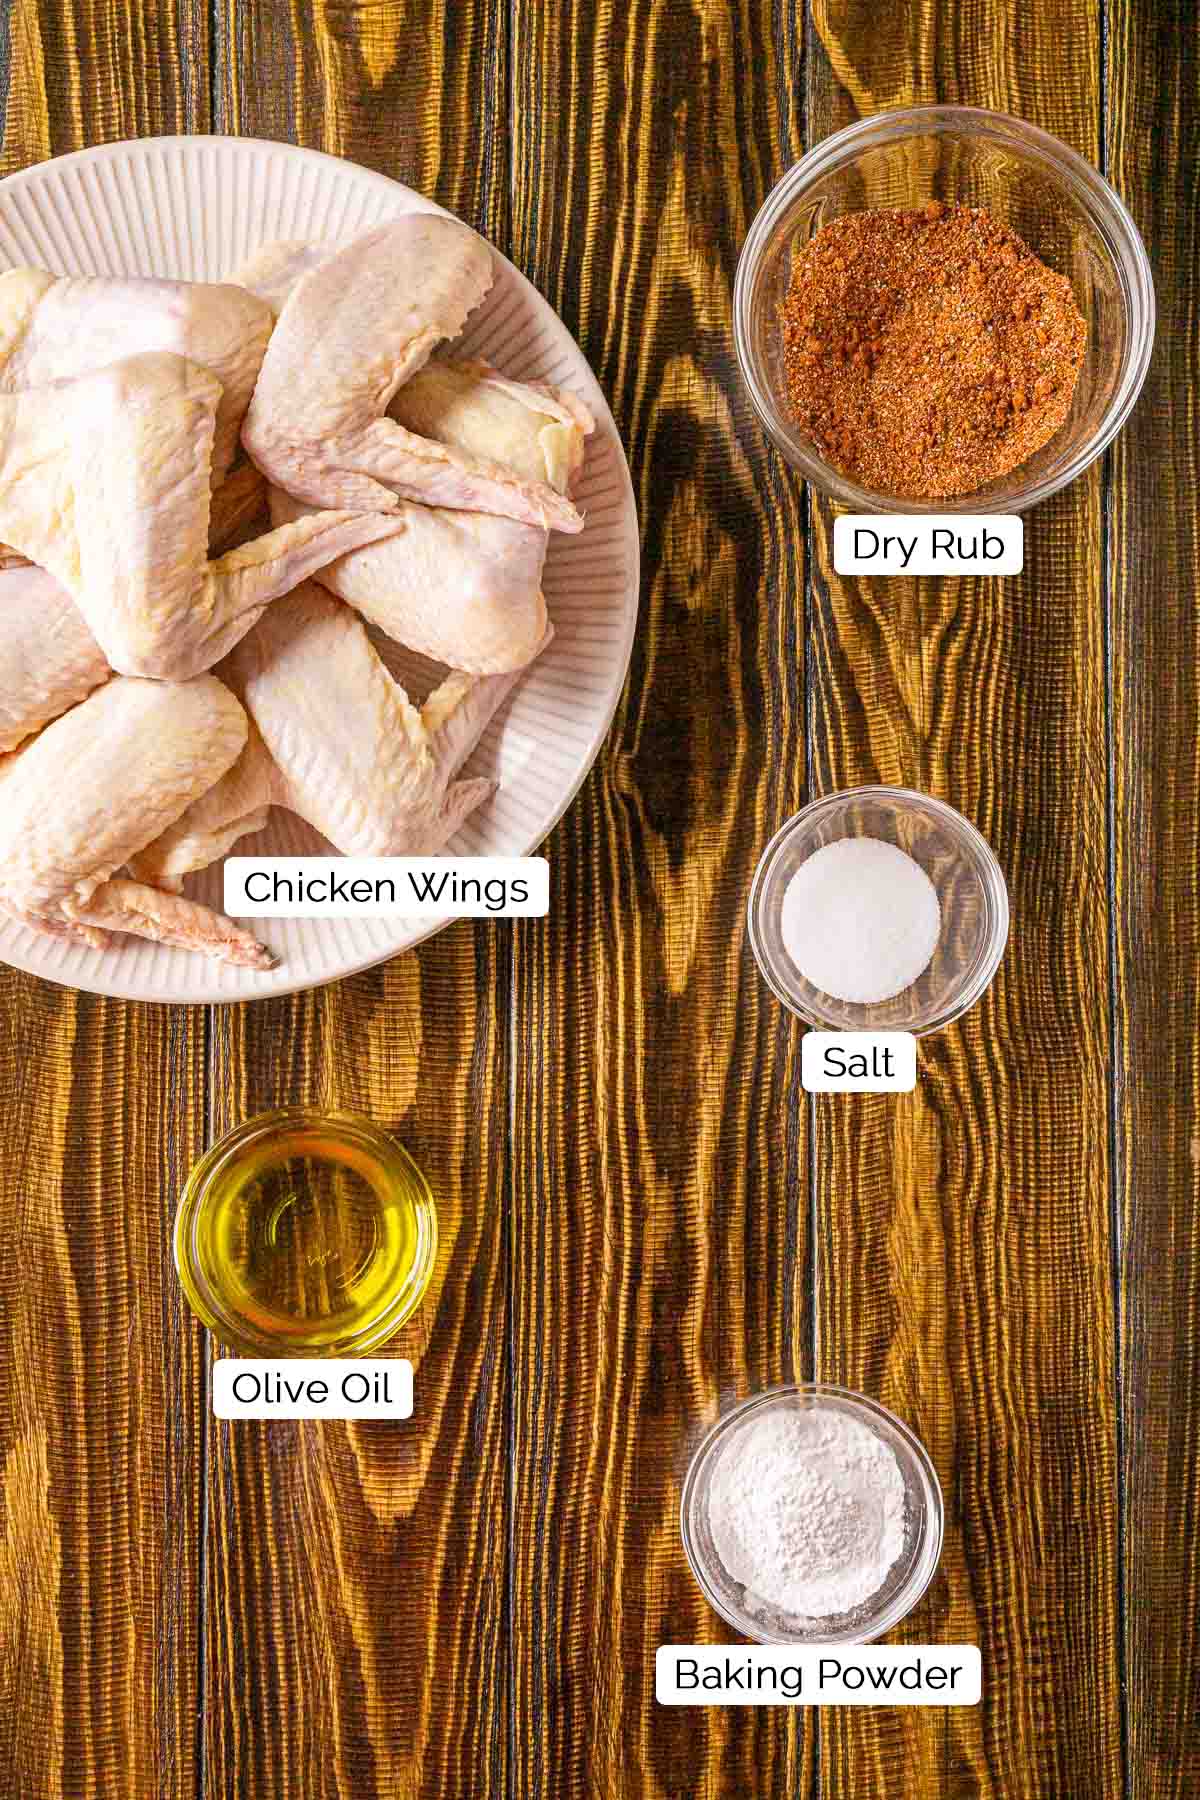 The ingredients on a brown wooden board with black and white labels by each item.